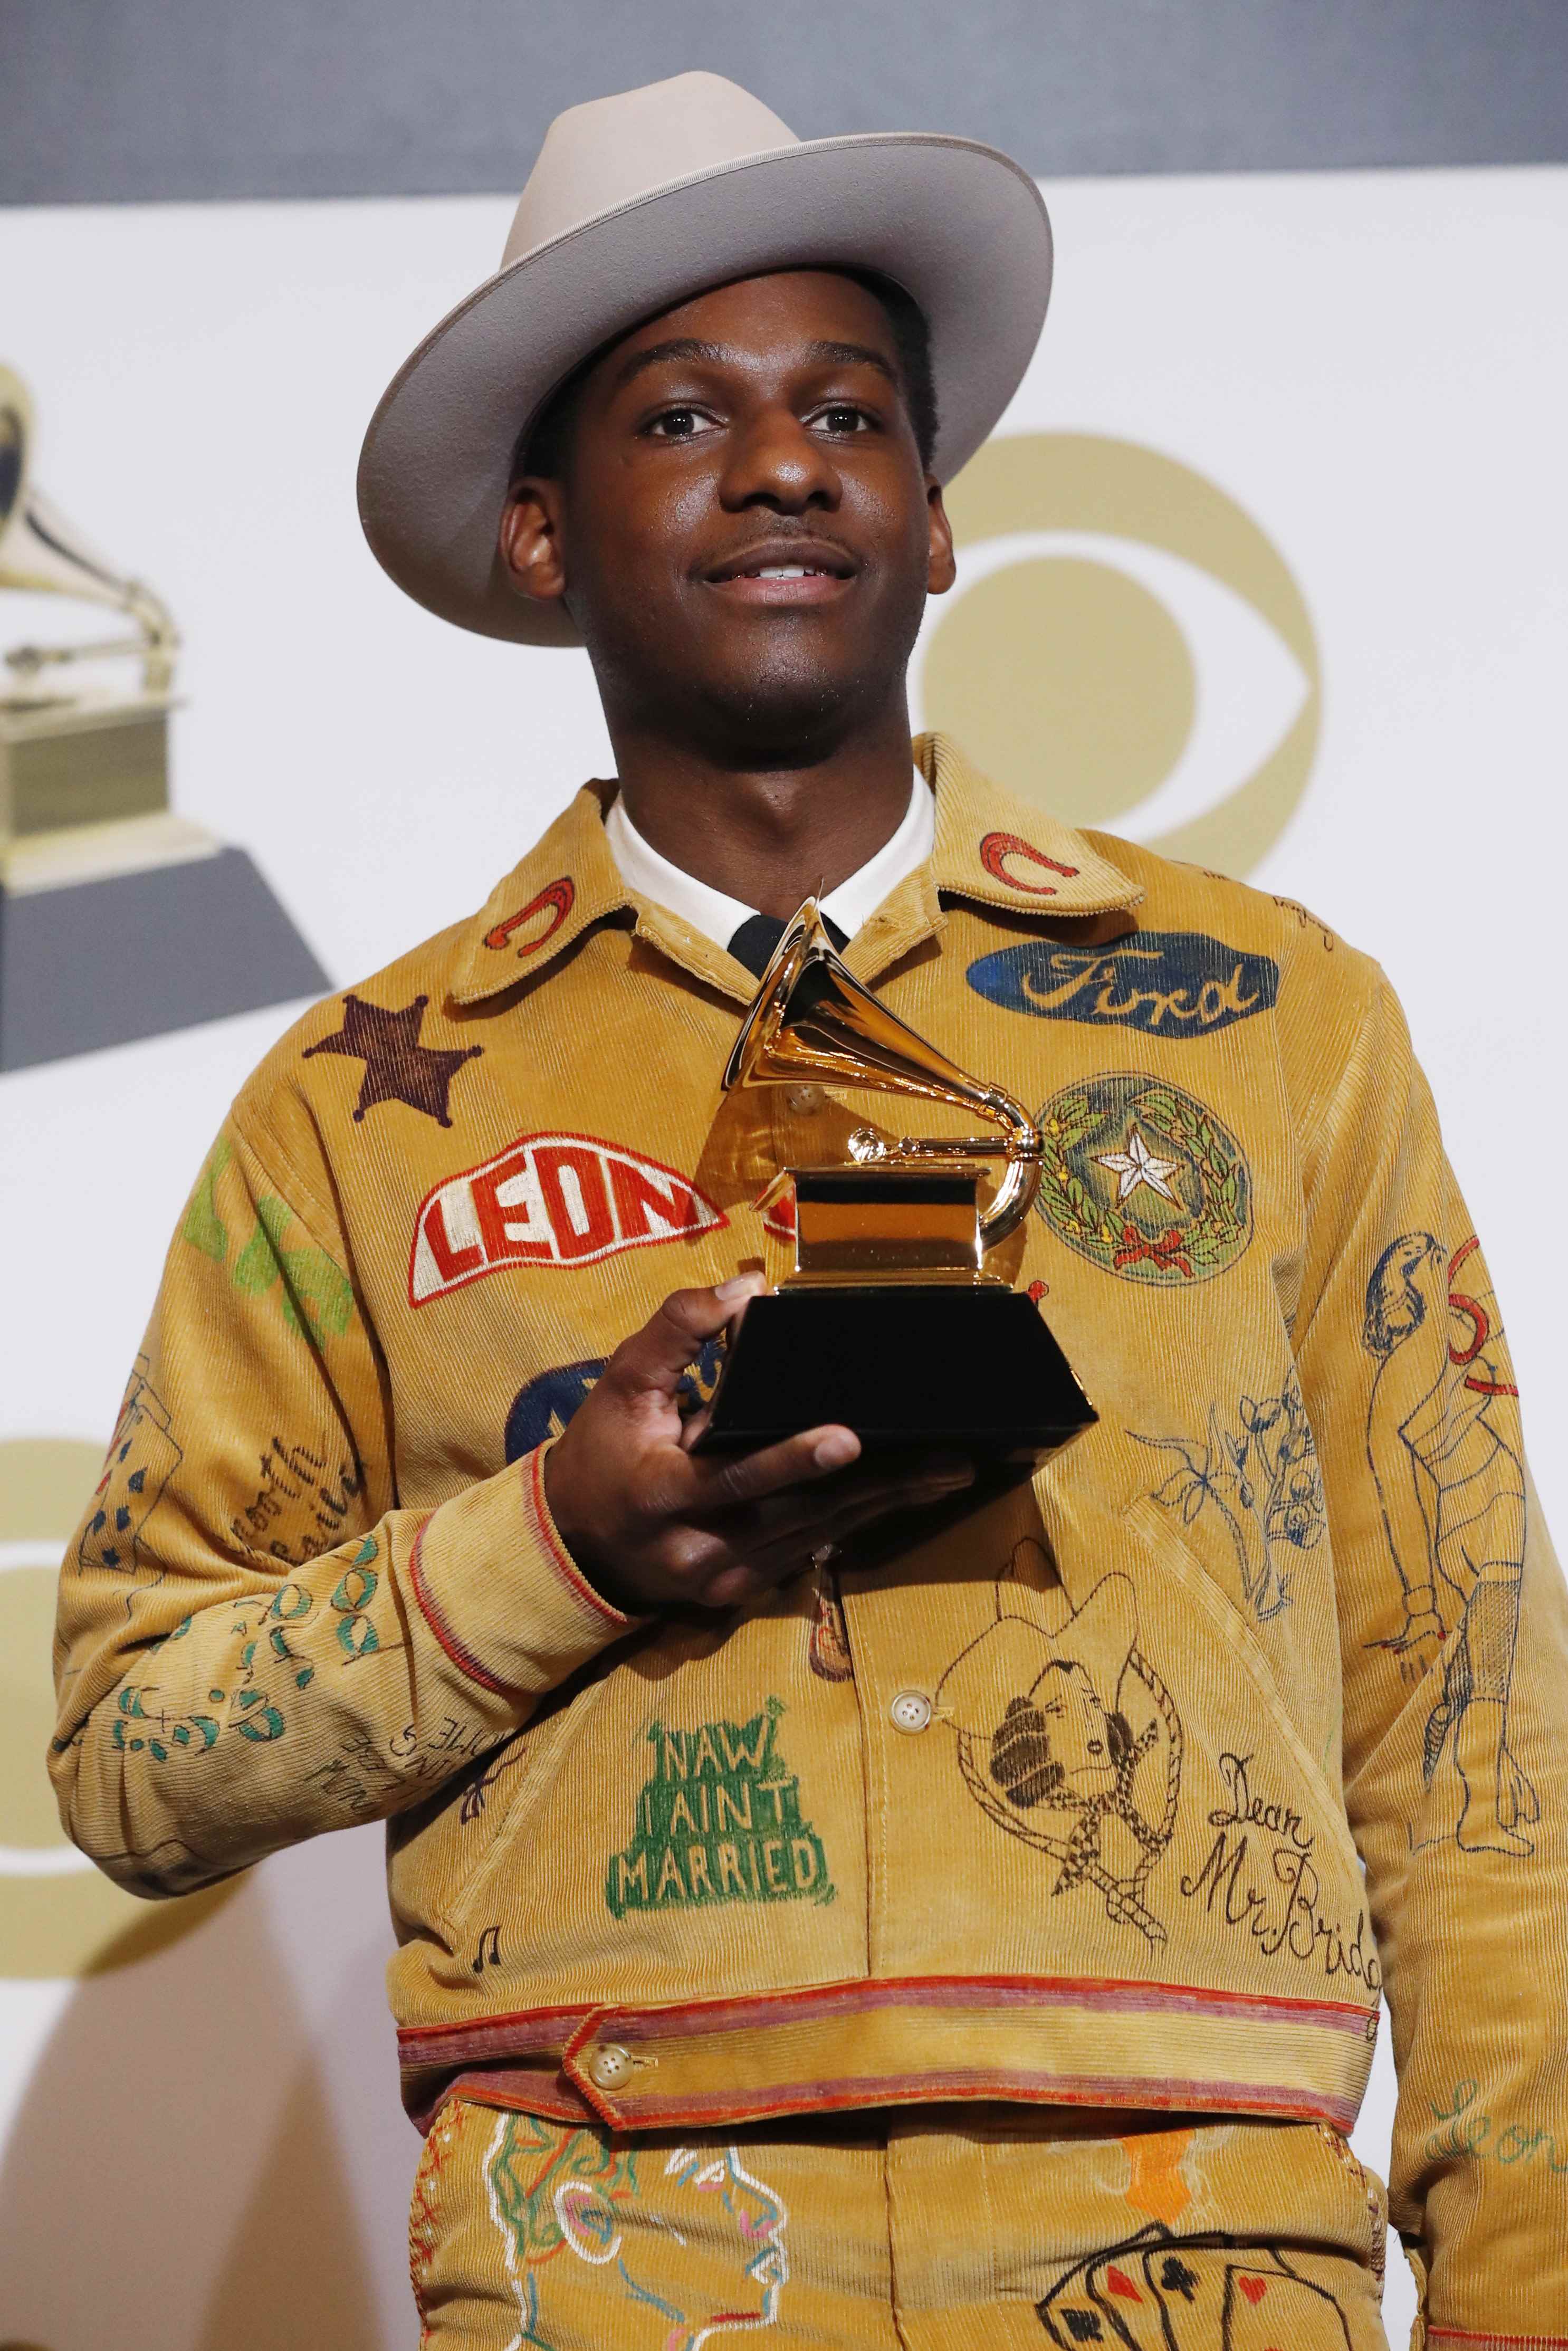 61st Grammy Awards - Photo Room - Los Angeles, California, U.S., February 10, 2019 - Leon Bridges wins Best Traditional R&B Performance for "Bet Ain't Worth The Hand" REUTERS/Mario Anzuoni